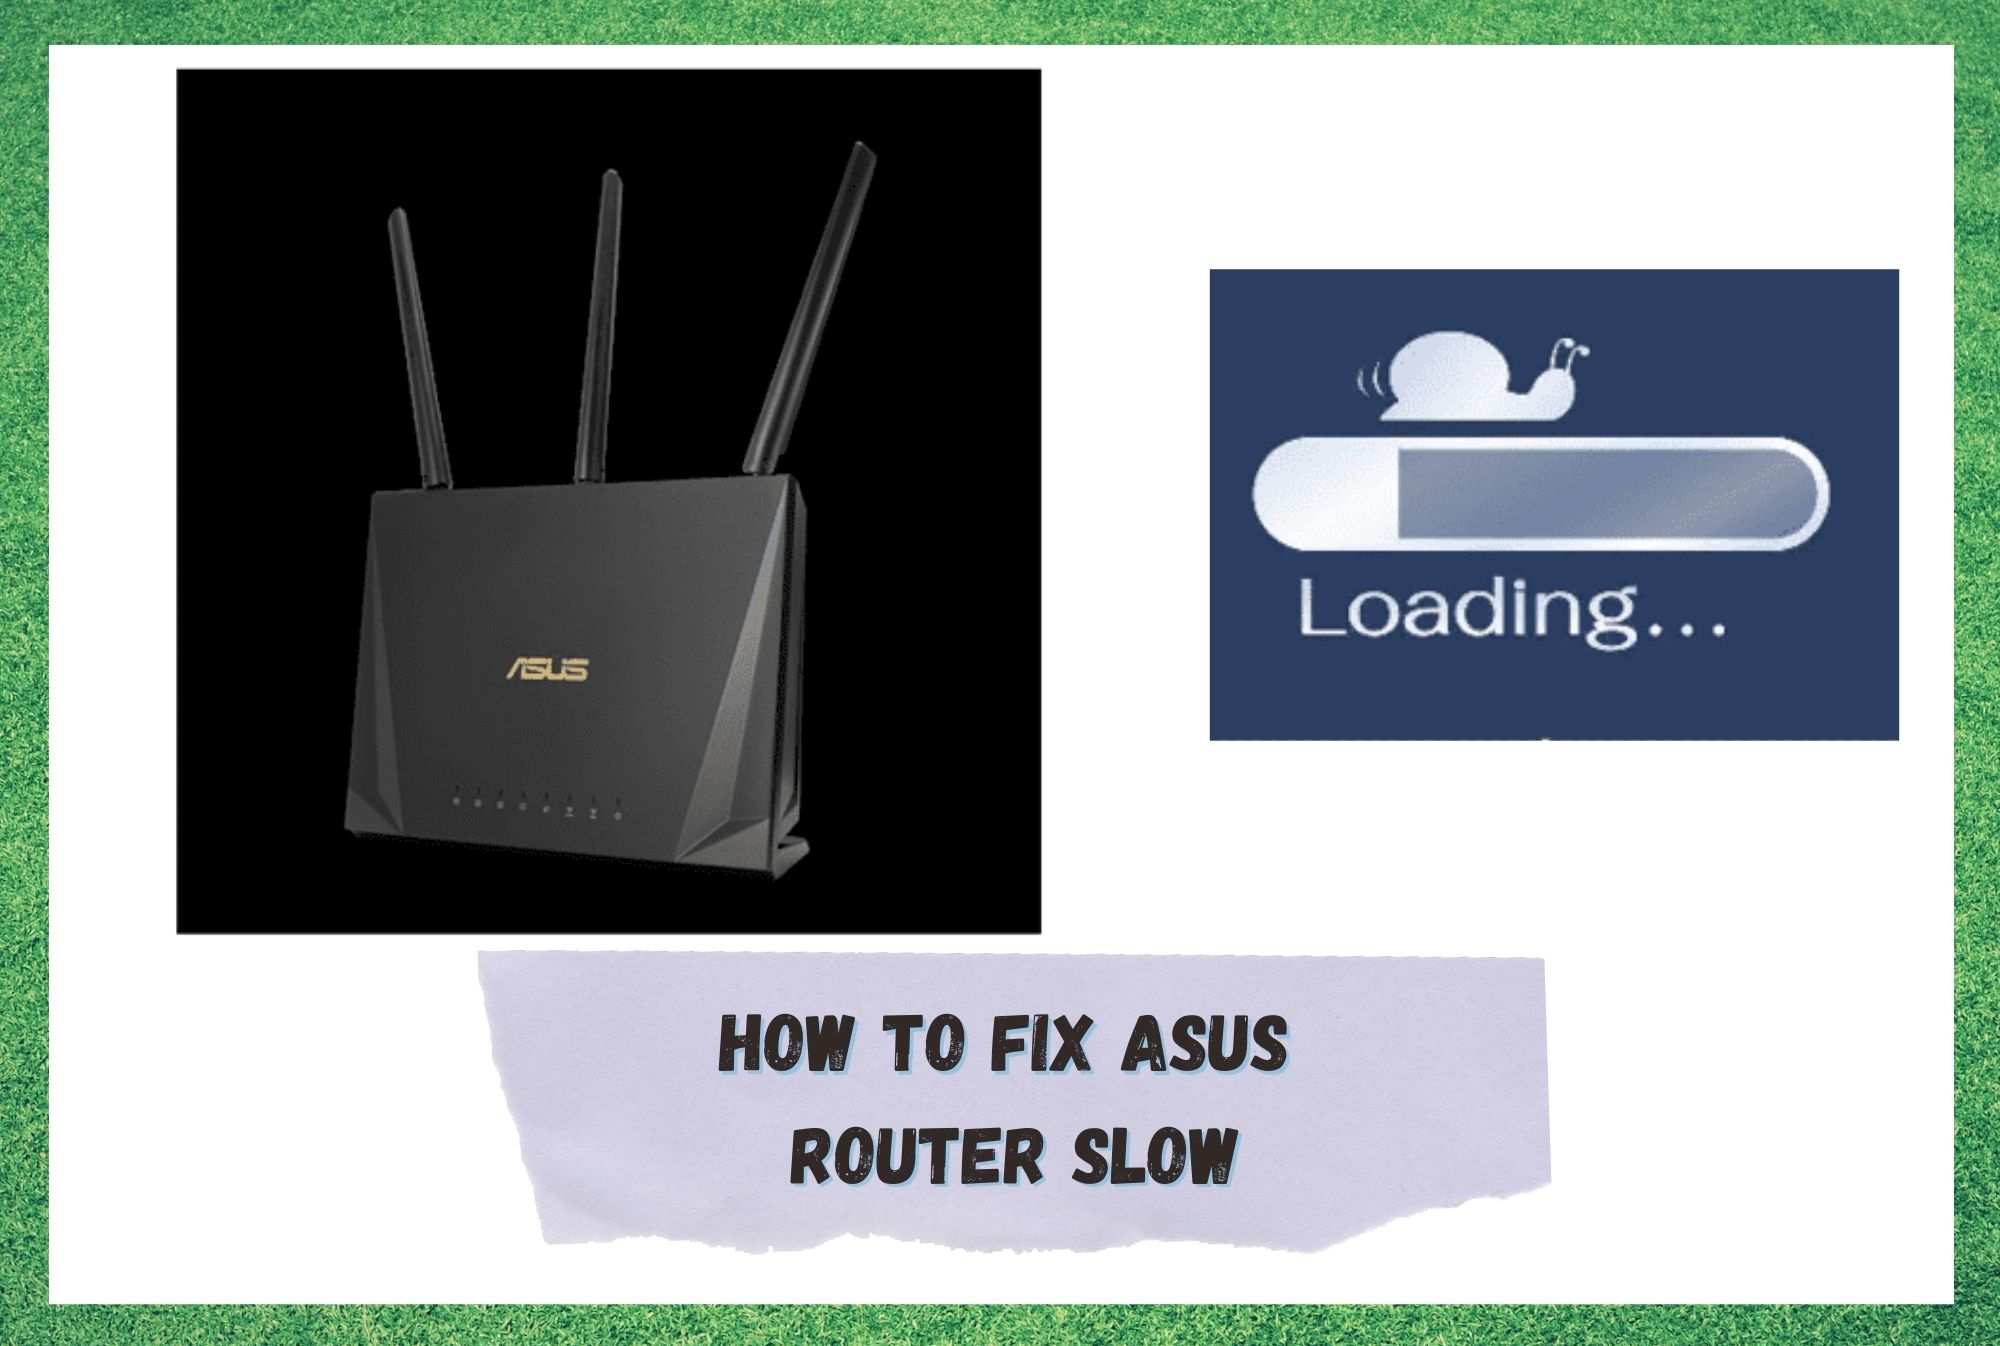 asus router slow